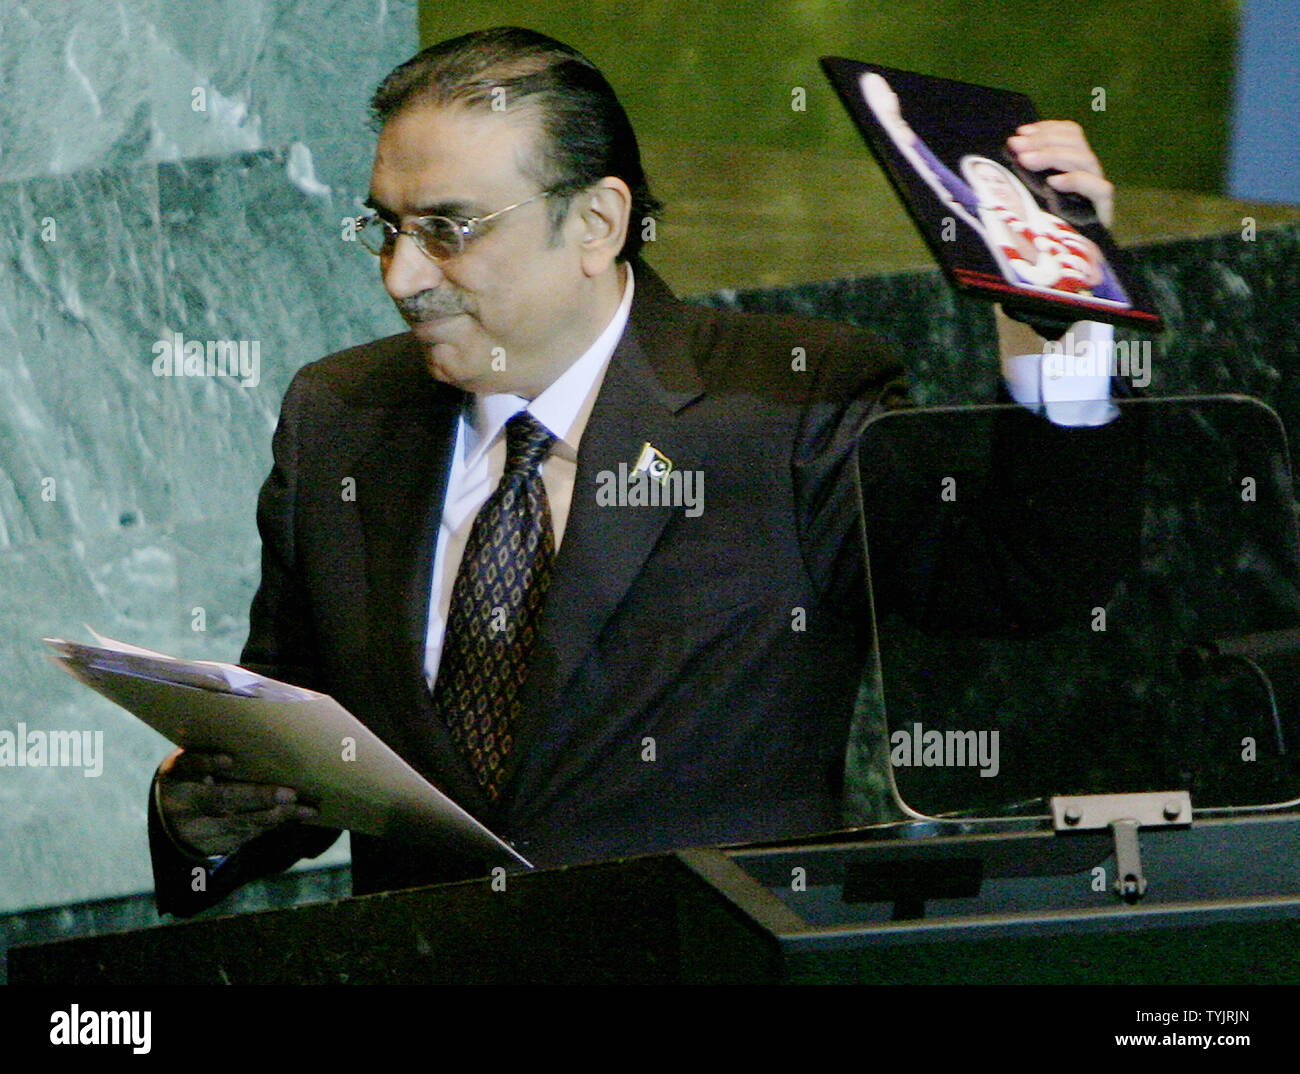 Asif Ali Zardari, President of Pakistan and husband of Benazir Bhutto, removes the photo of the assassinated political leader which he placed on the podium while addressing the 63rd session of the General Assembly at the United Nations on September 25, 2008 in New York City. (UPI Photo/Monika Graff) Stock Photo